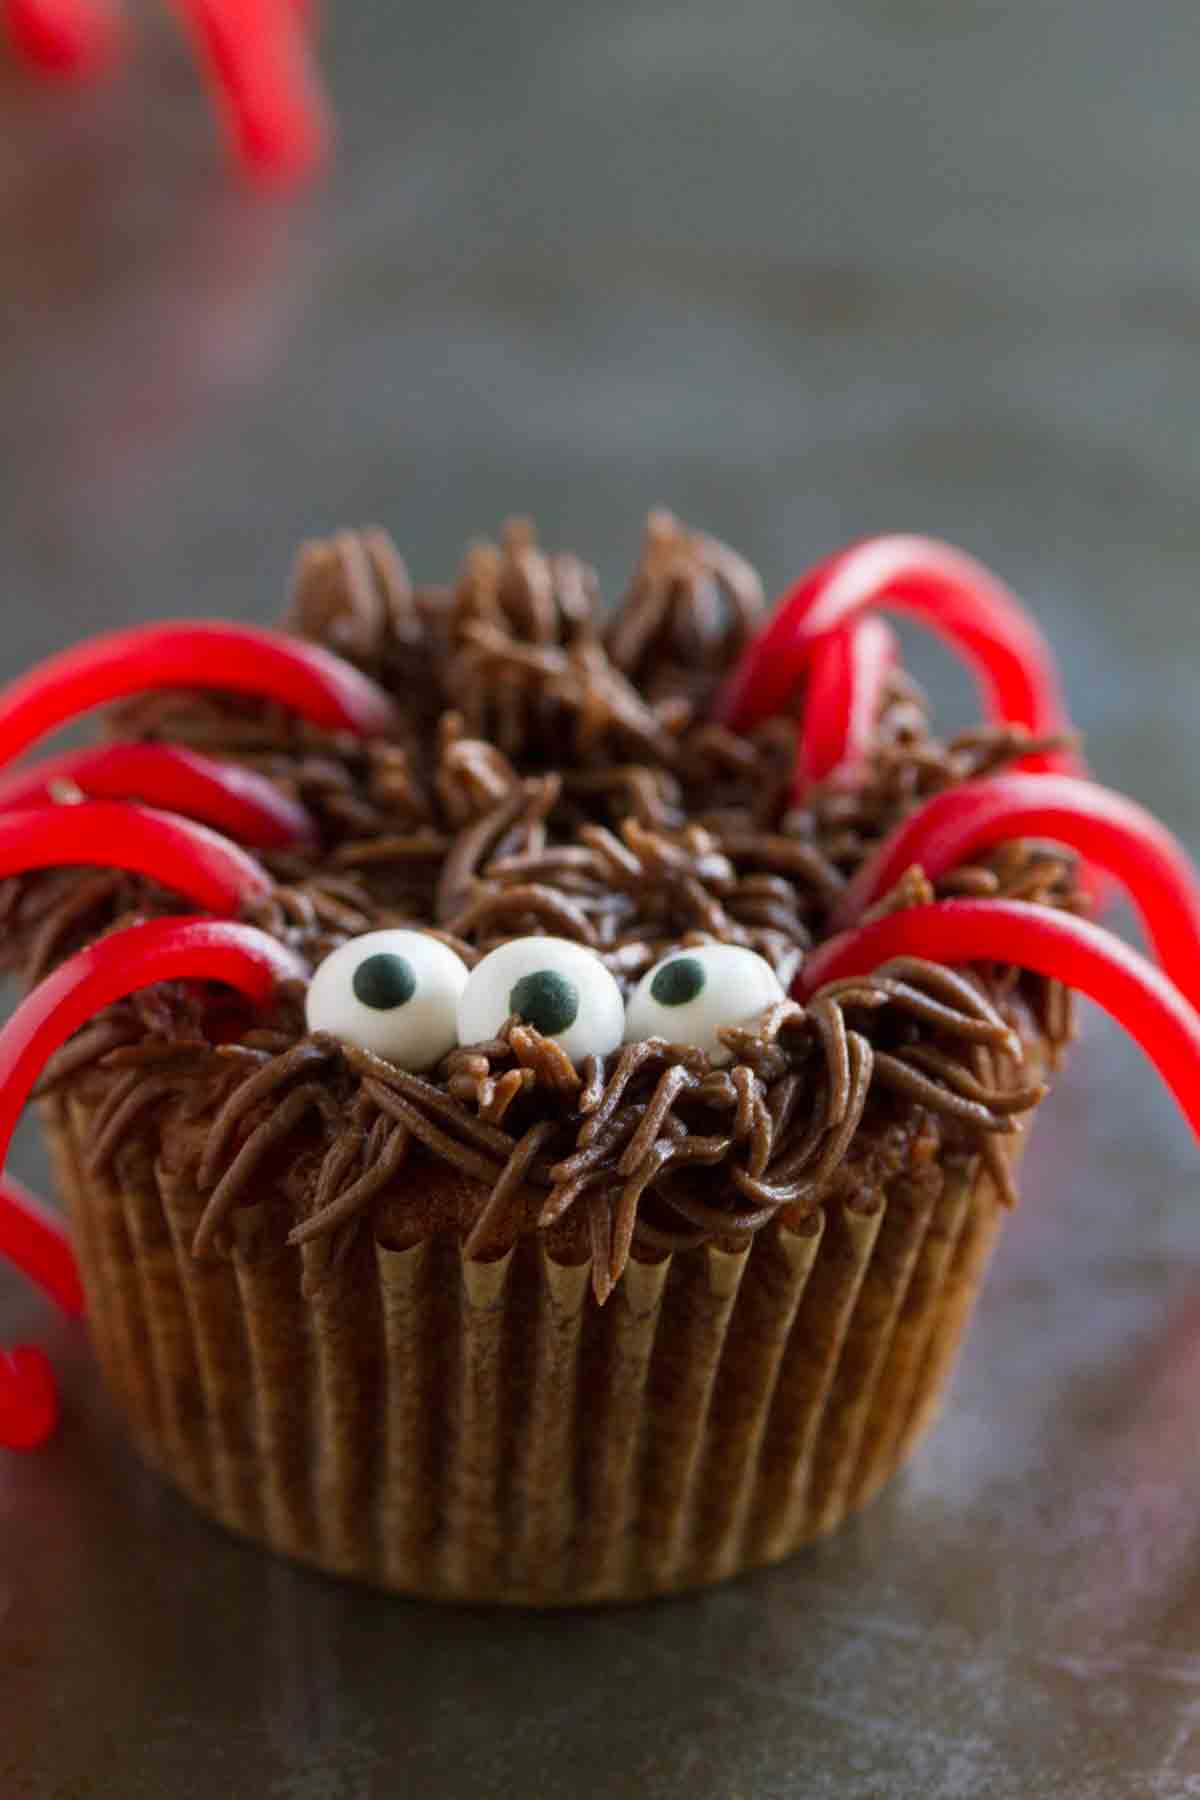 Cupcake topped with buttercream, candy eyes, and candy legs to resemble a spider.